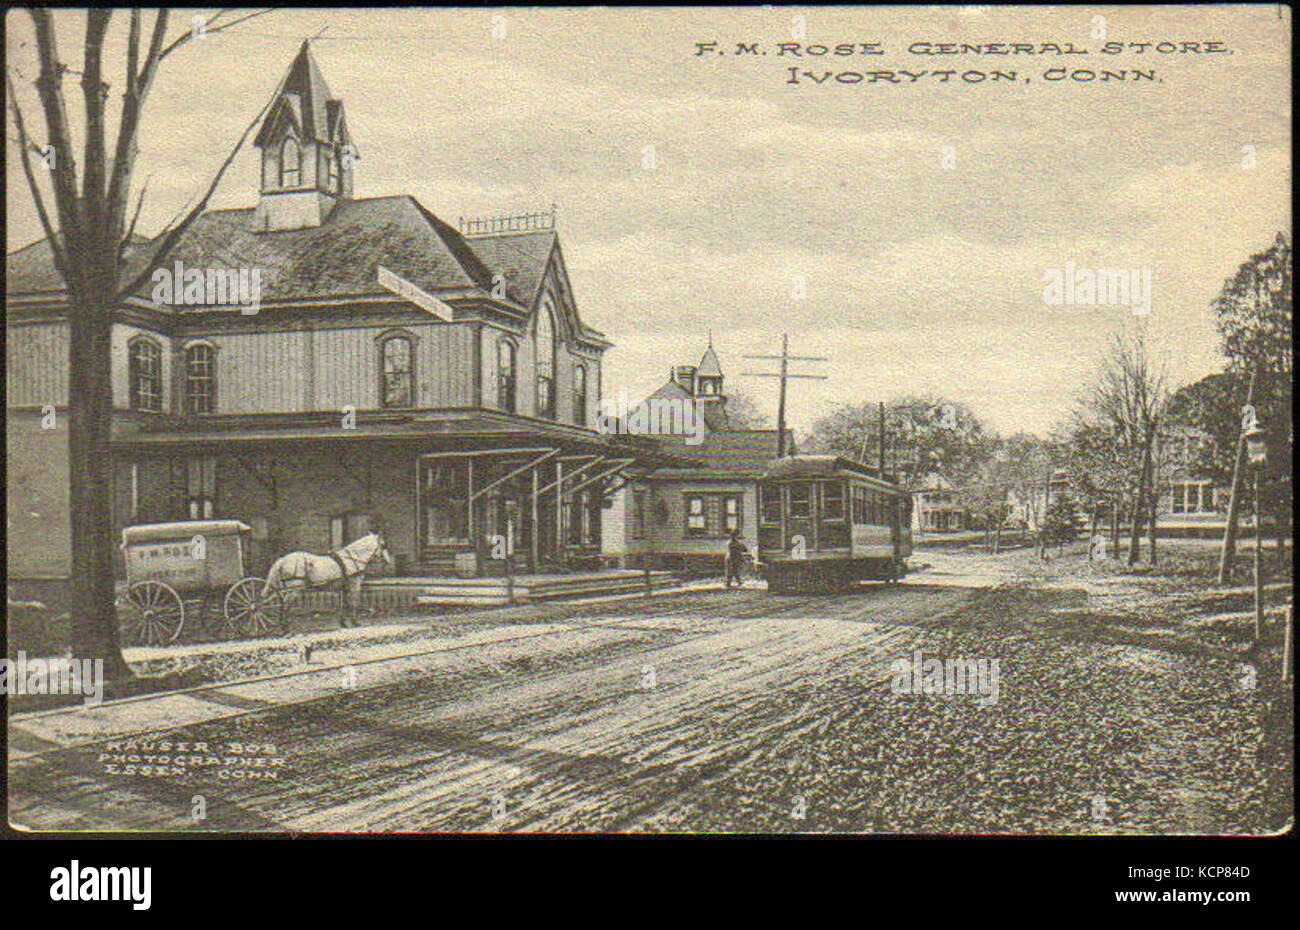 F.M. Rose General Store and trolley, Ivoryton postcard Stock Photo